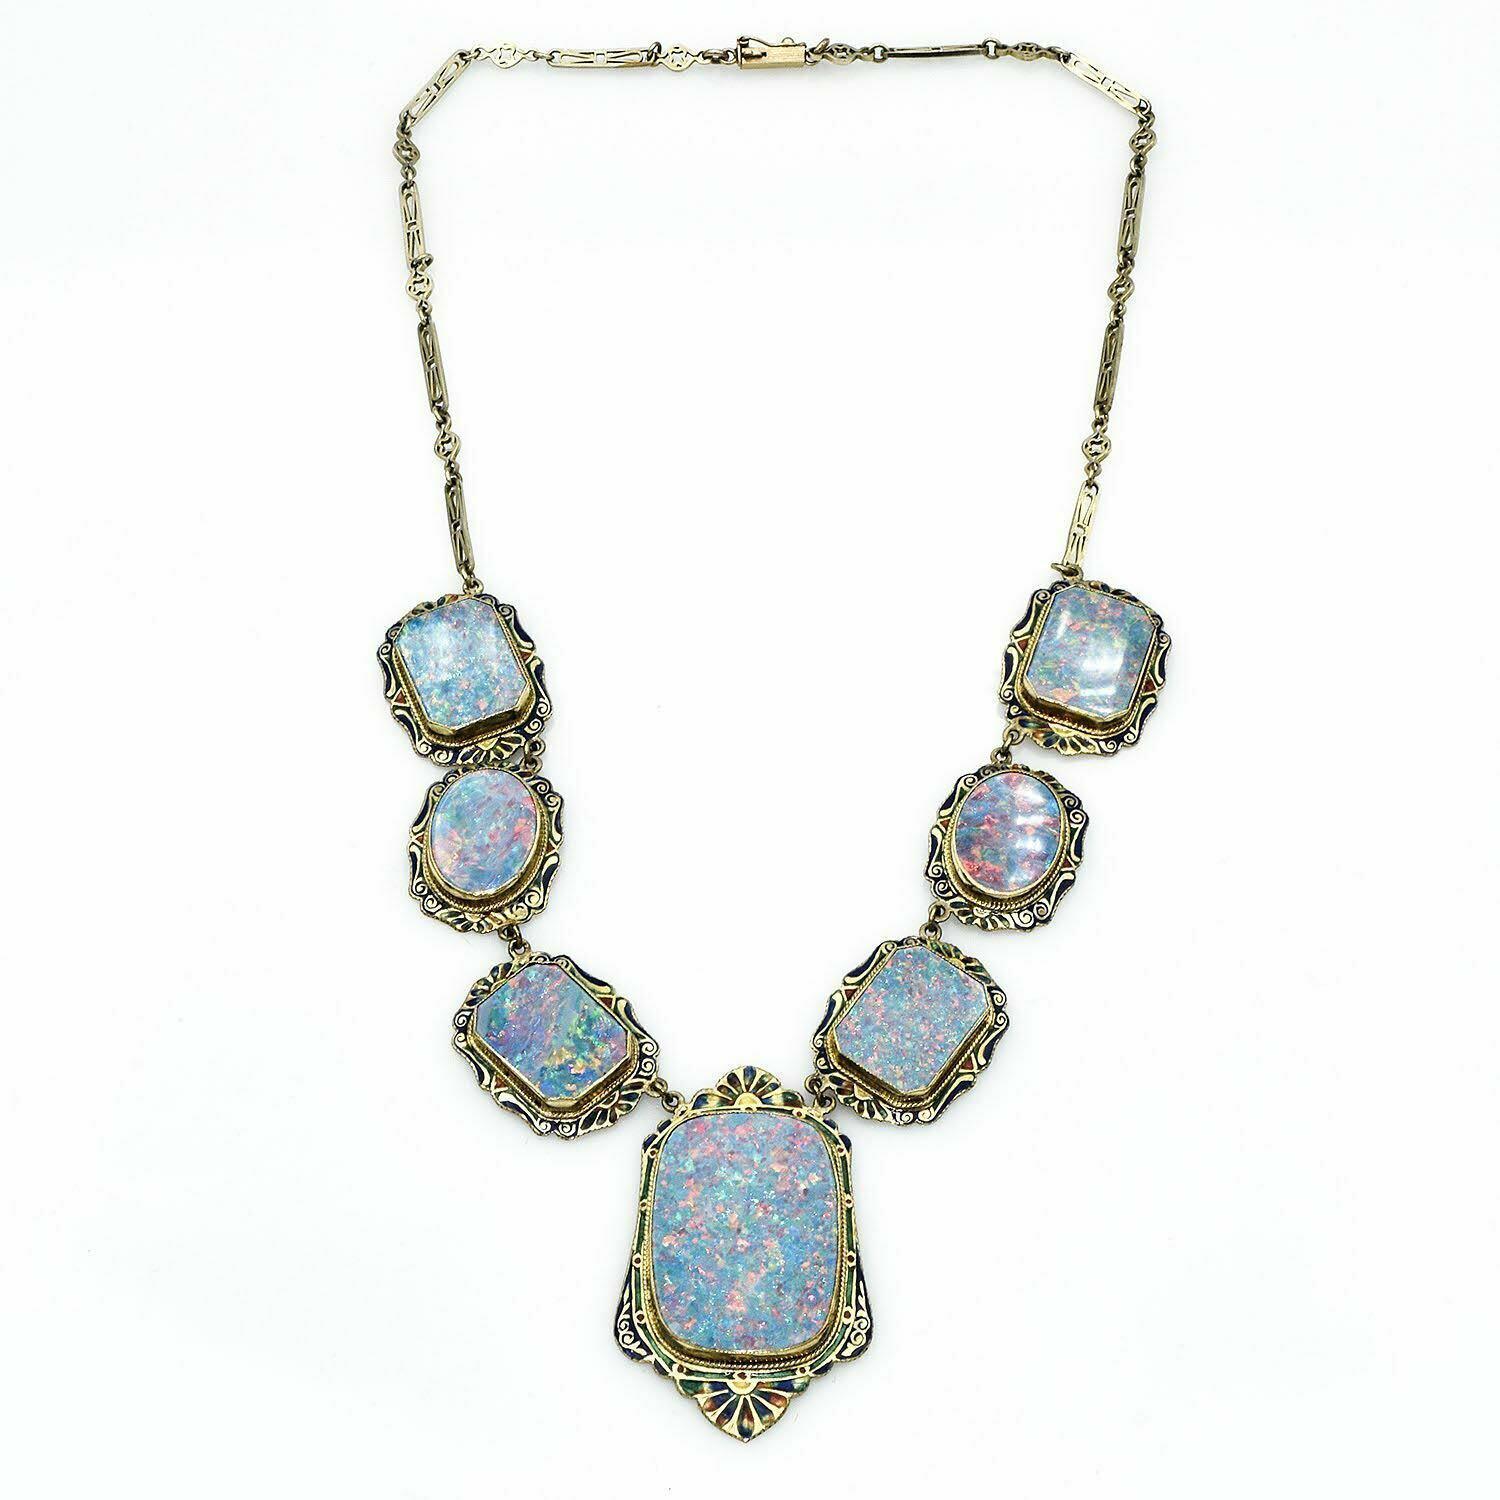 Material: 14K Yellow Gold
Weight: 34.6 Grams
Stone: Opals 11.5 x 16.2 mm - 19.7 x 27.5 mm
Necklace Length: 17 Inches
Hallmark: 14K